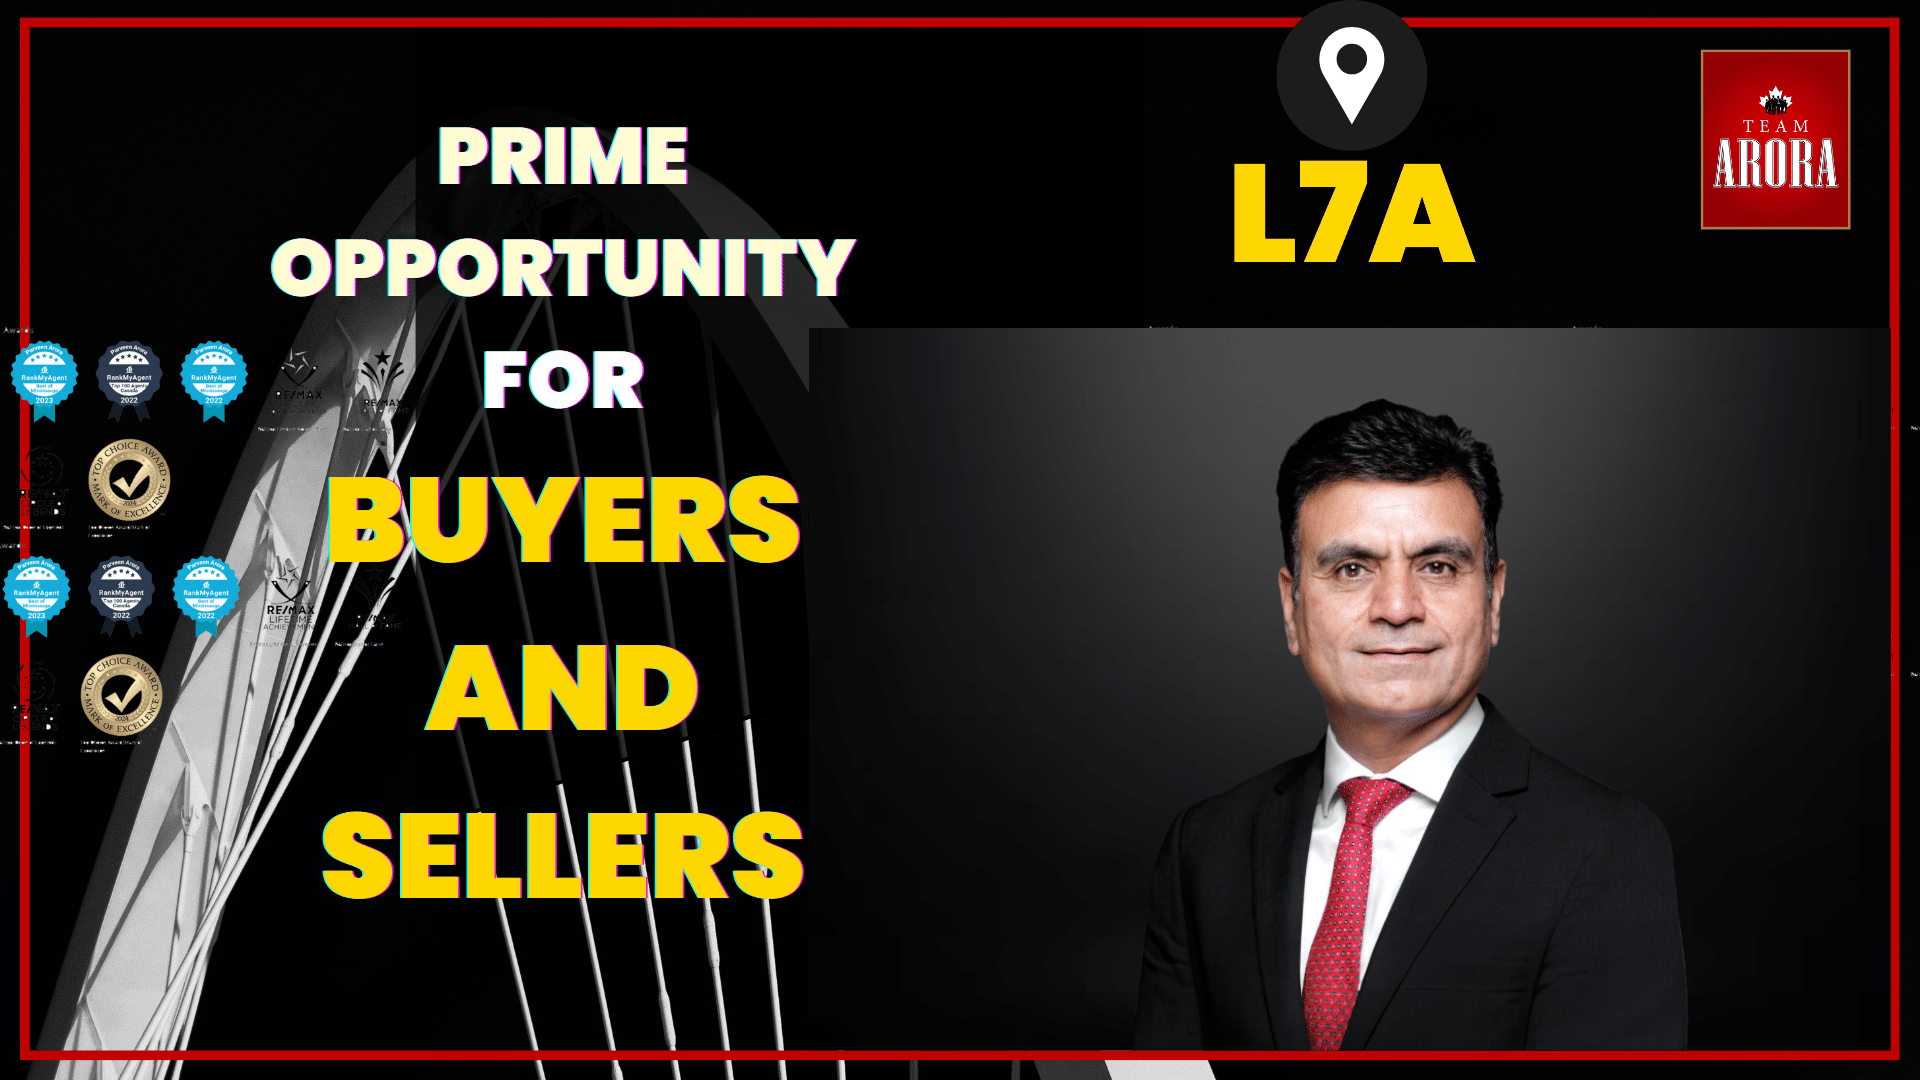 Investing in the L7A Area: A Prime Opportunity for Real Estate Buyers and Sellers